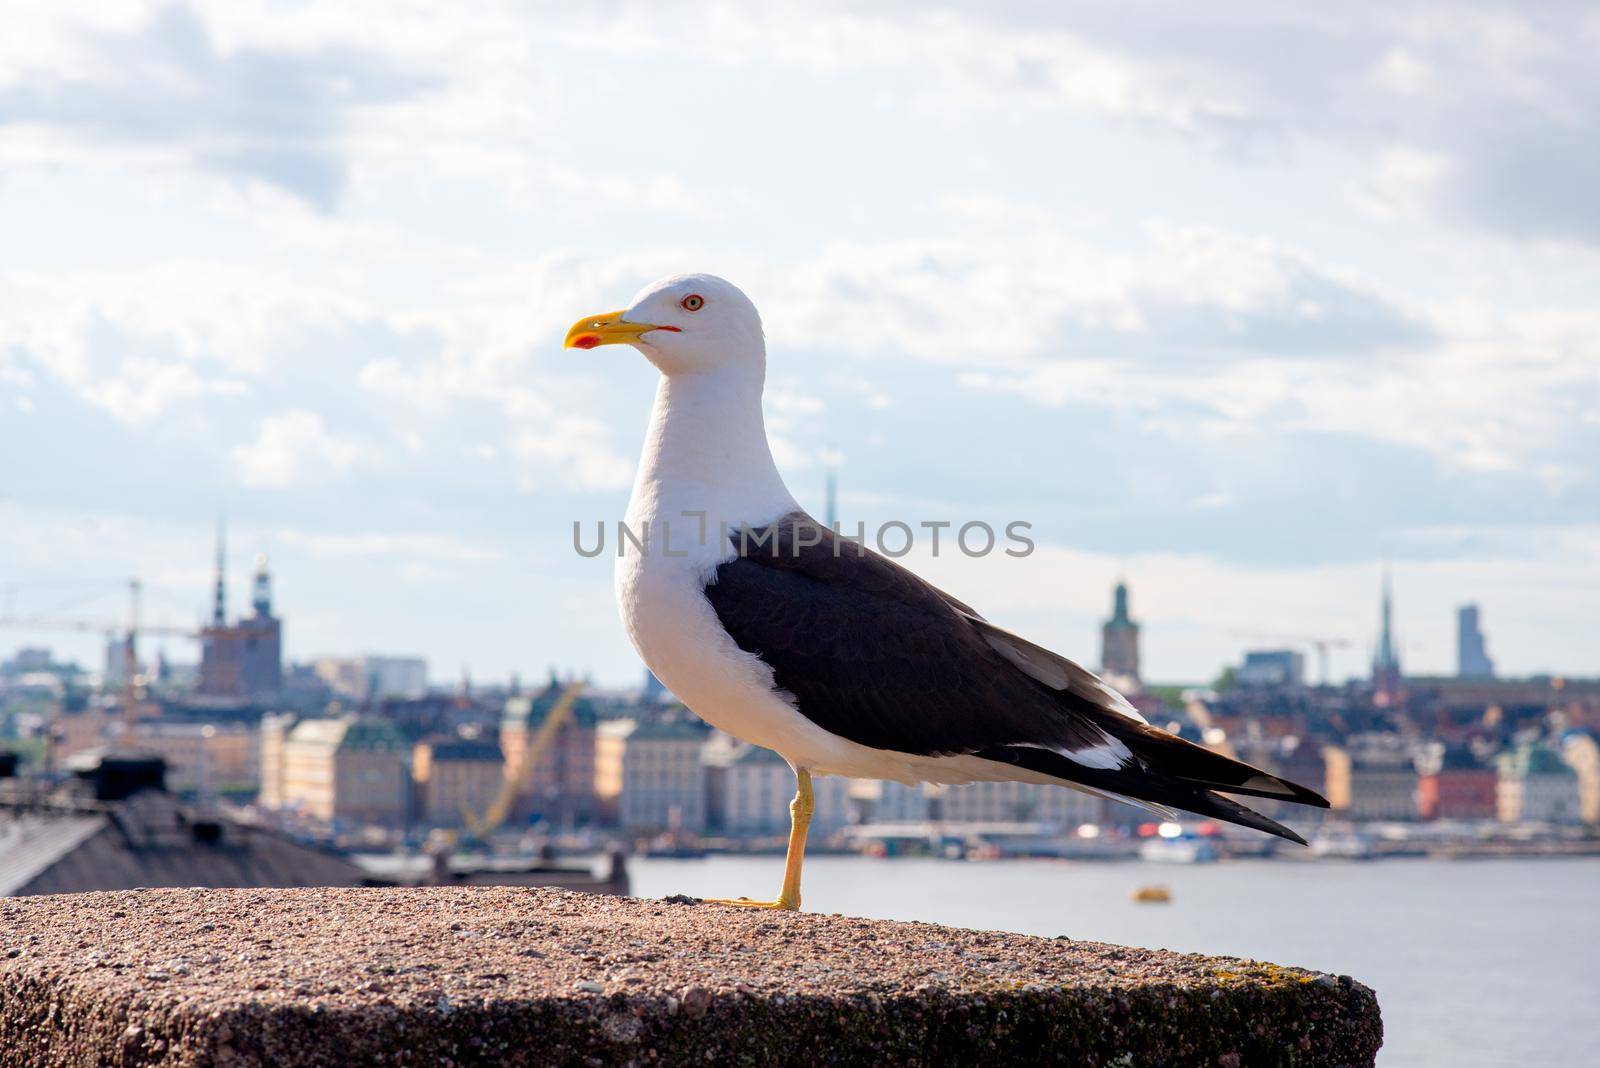 Seagull at the bridge with ocean and city of Stockholm in background at Sweden by Nuamfolio